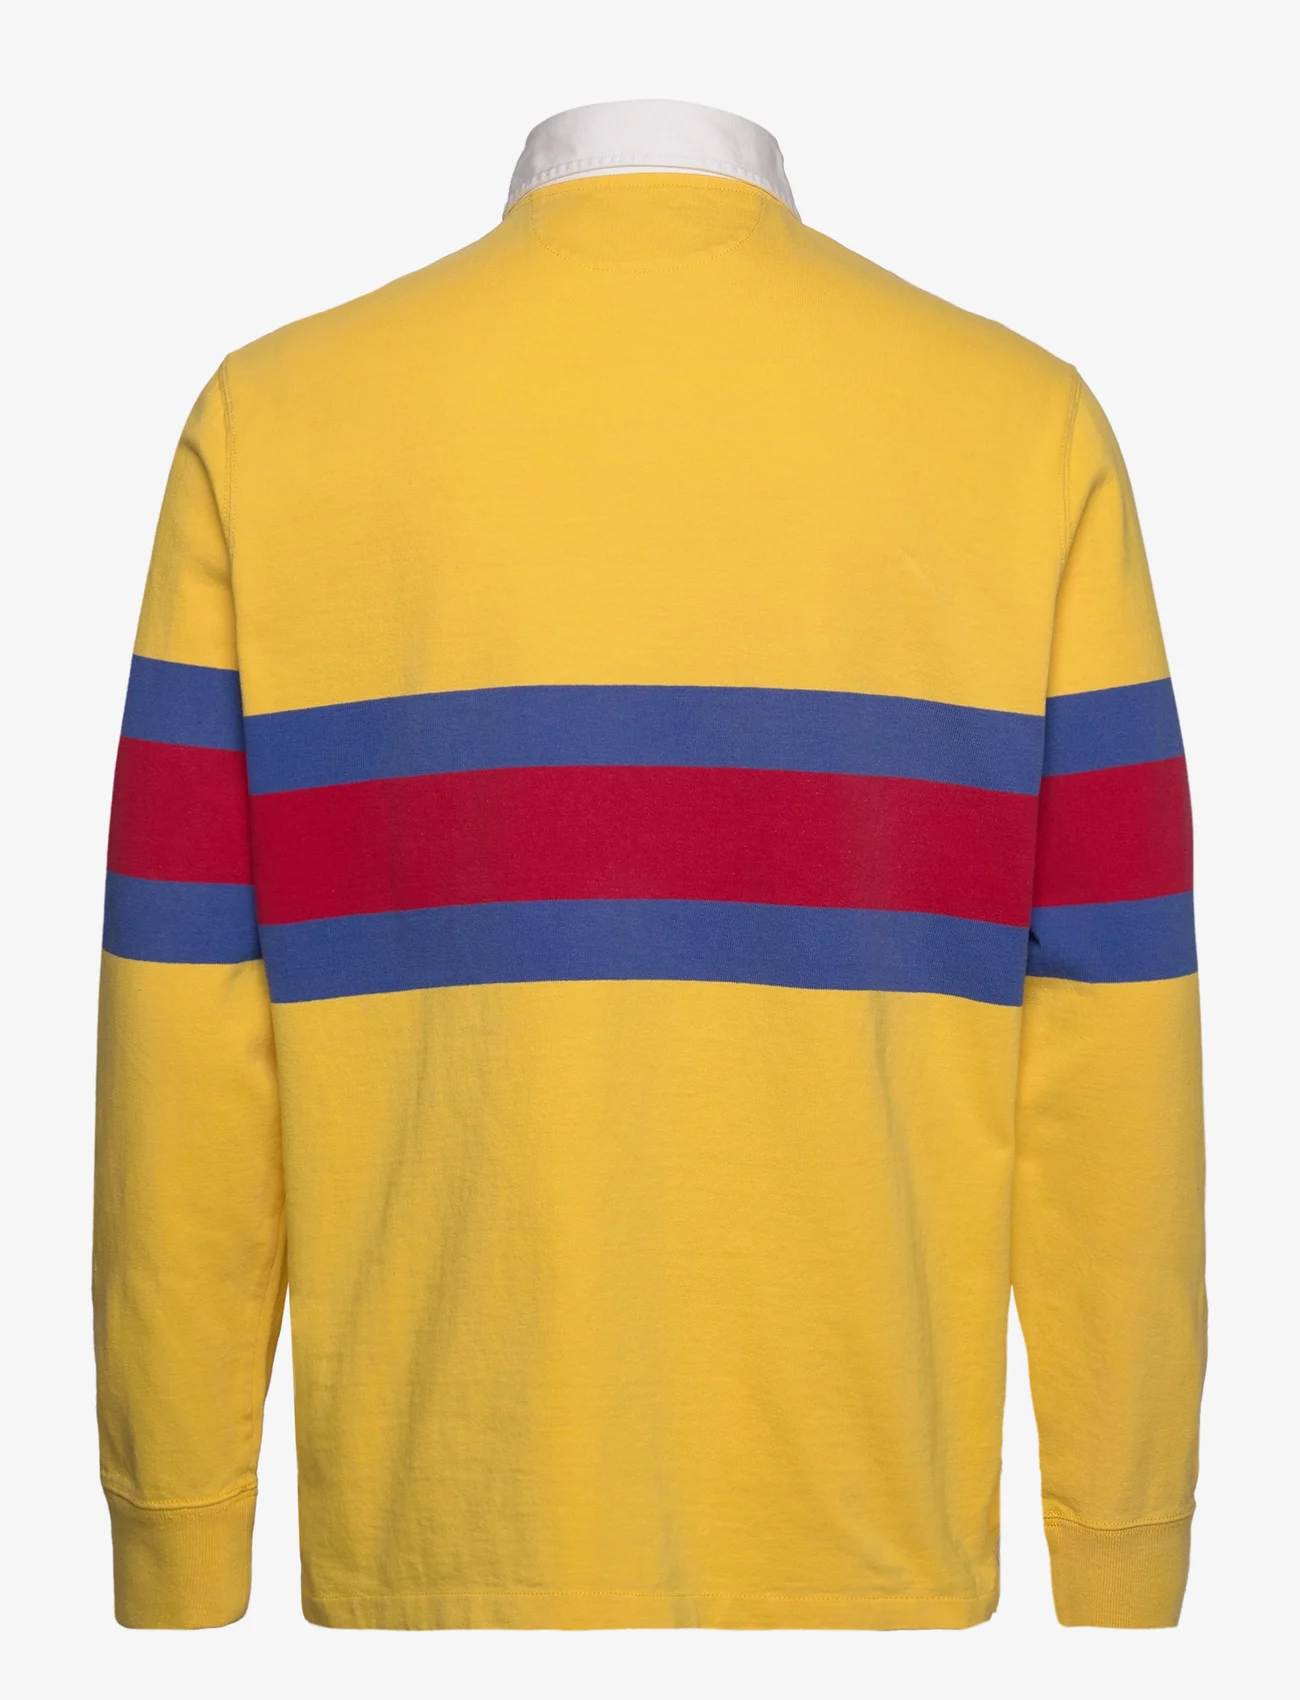 Polo Ralph Lauren - Classic Fit Striped Jersey Rugby Shirt - langärmelig - canary yellow mul - 1